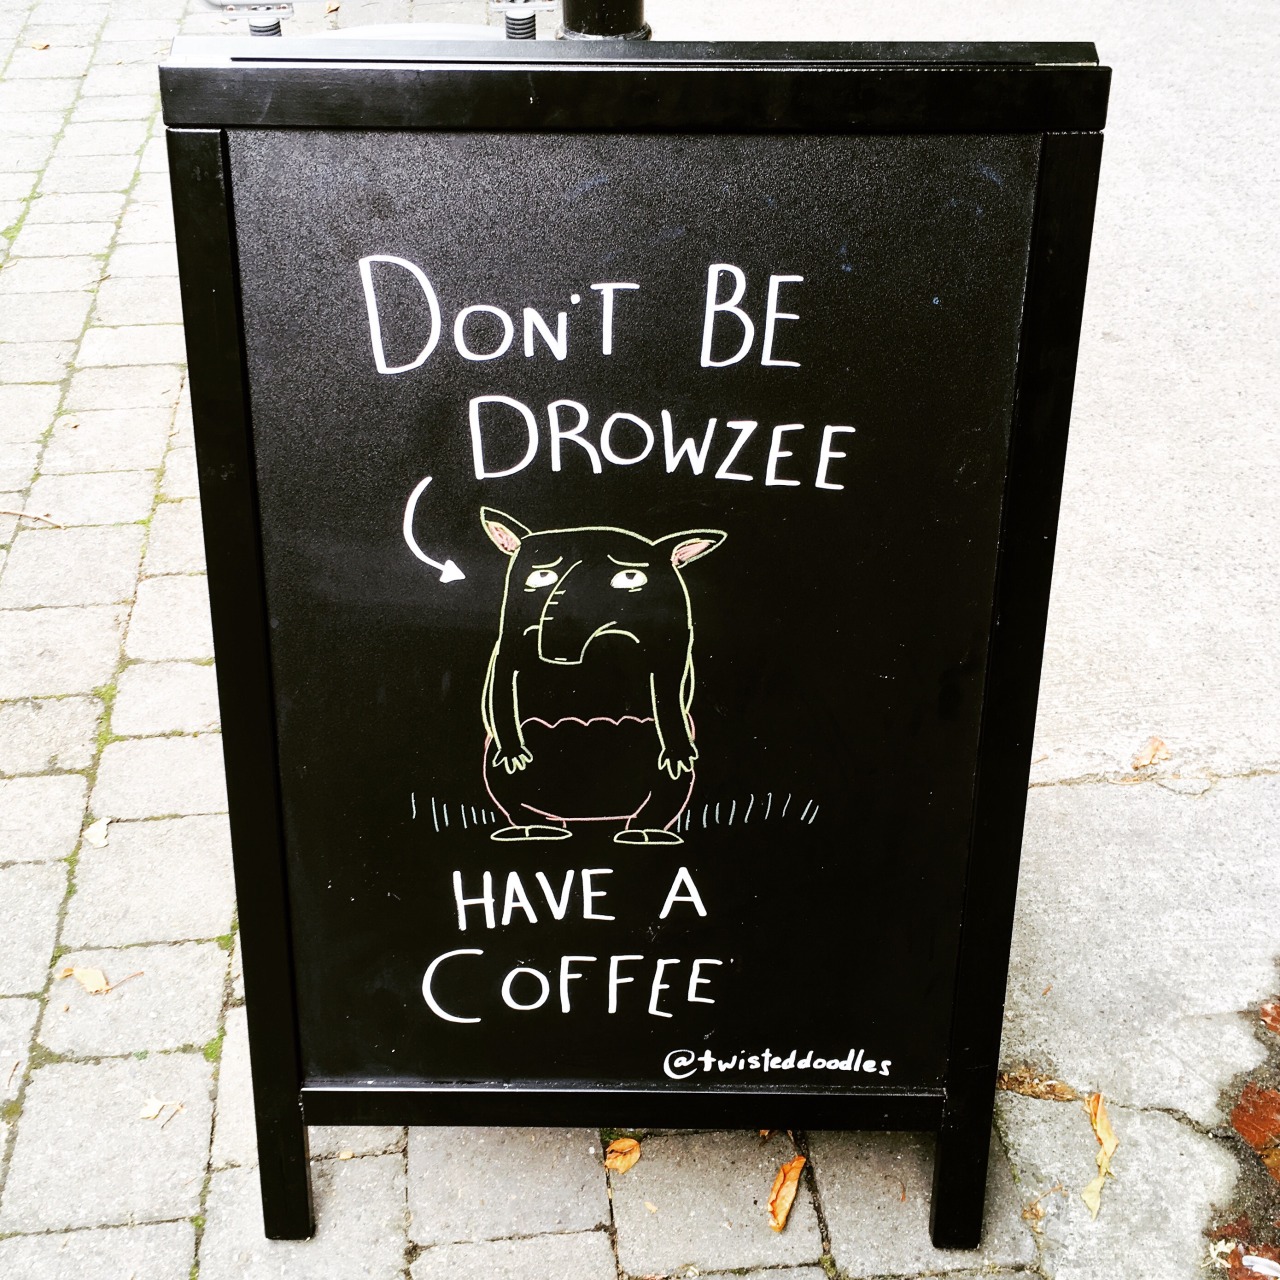 twisteddoodles:
“ A blackboard I did for my local coffee place.
”
ha! the best!